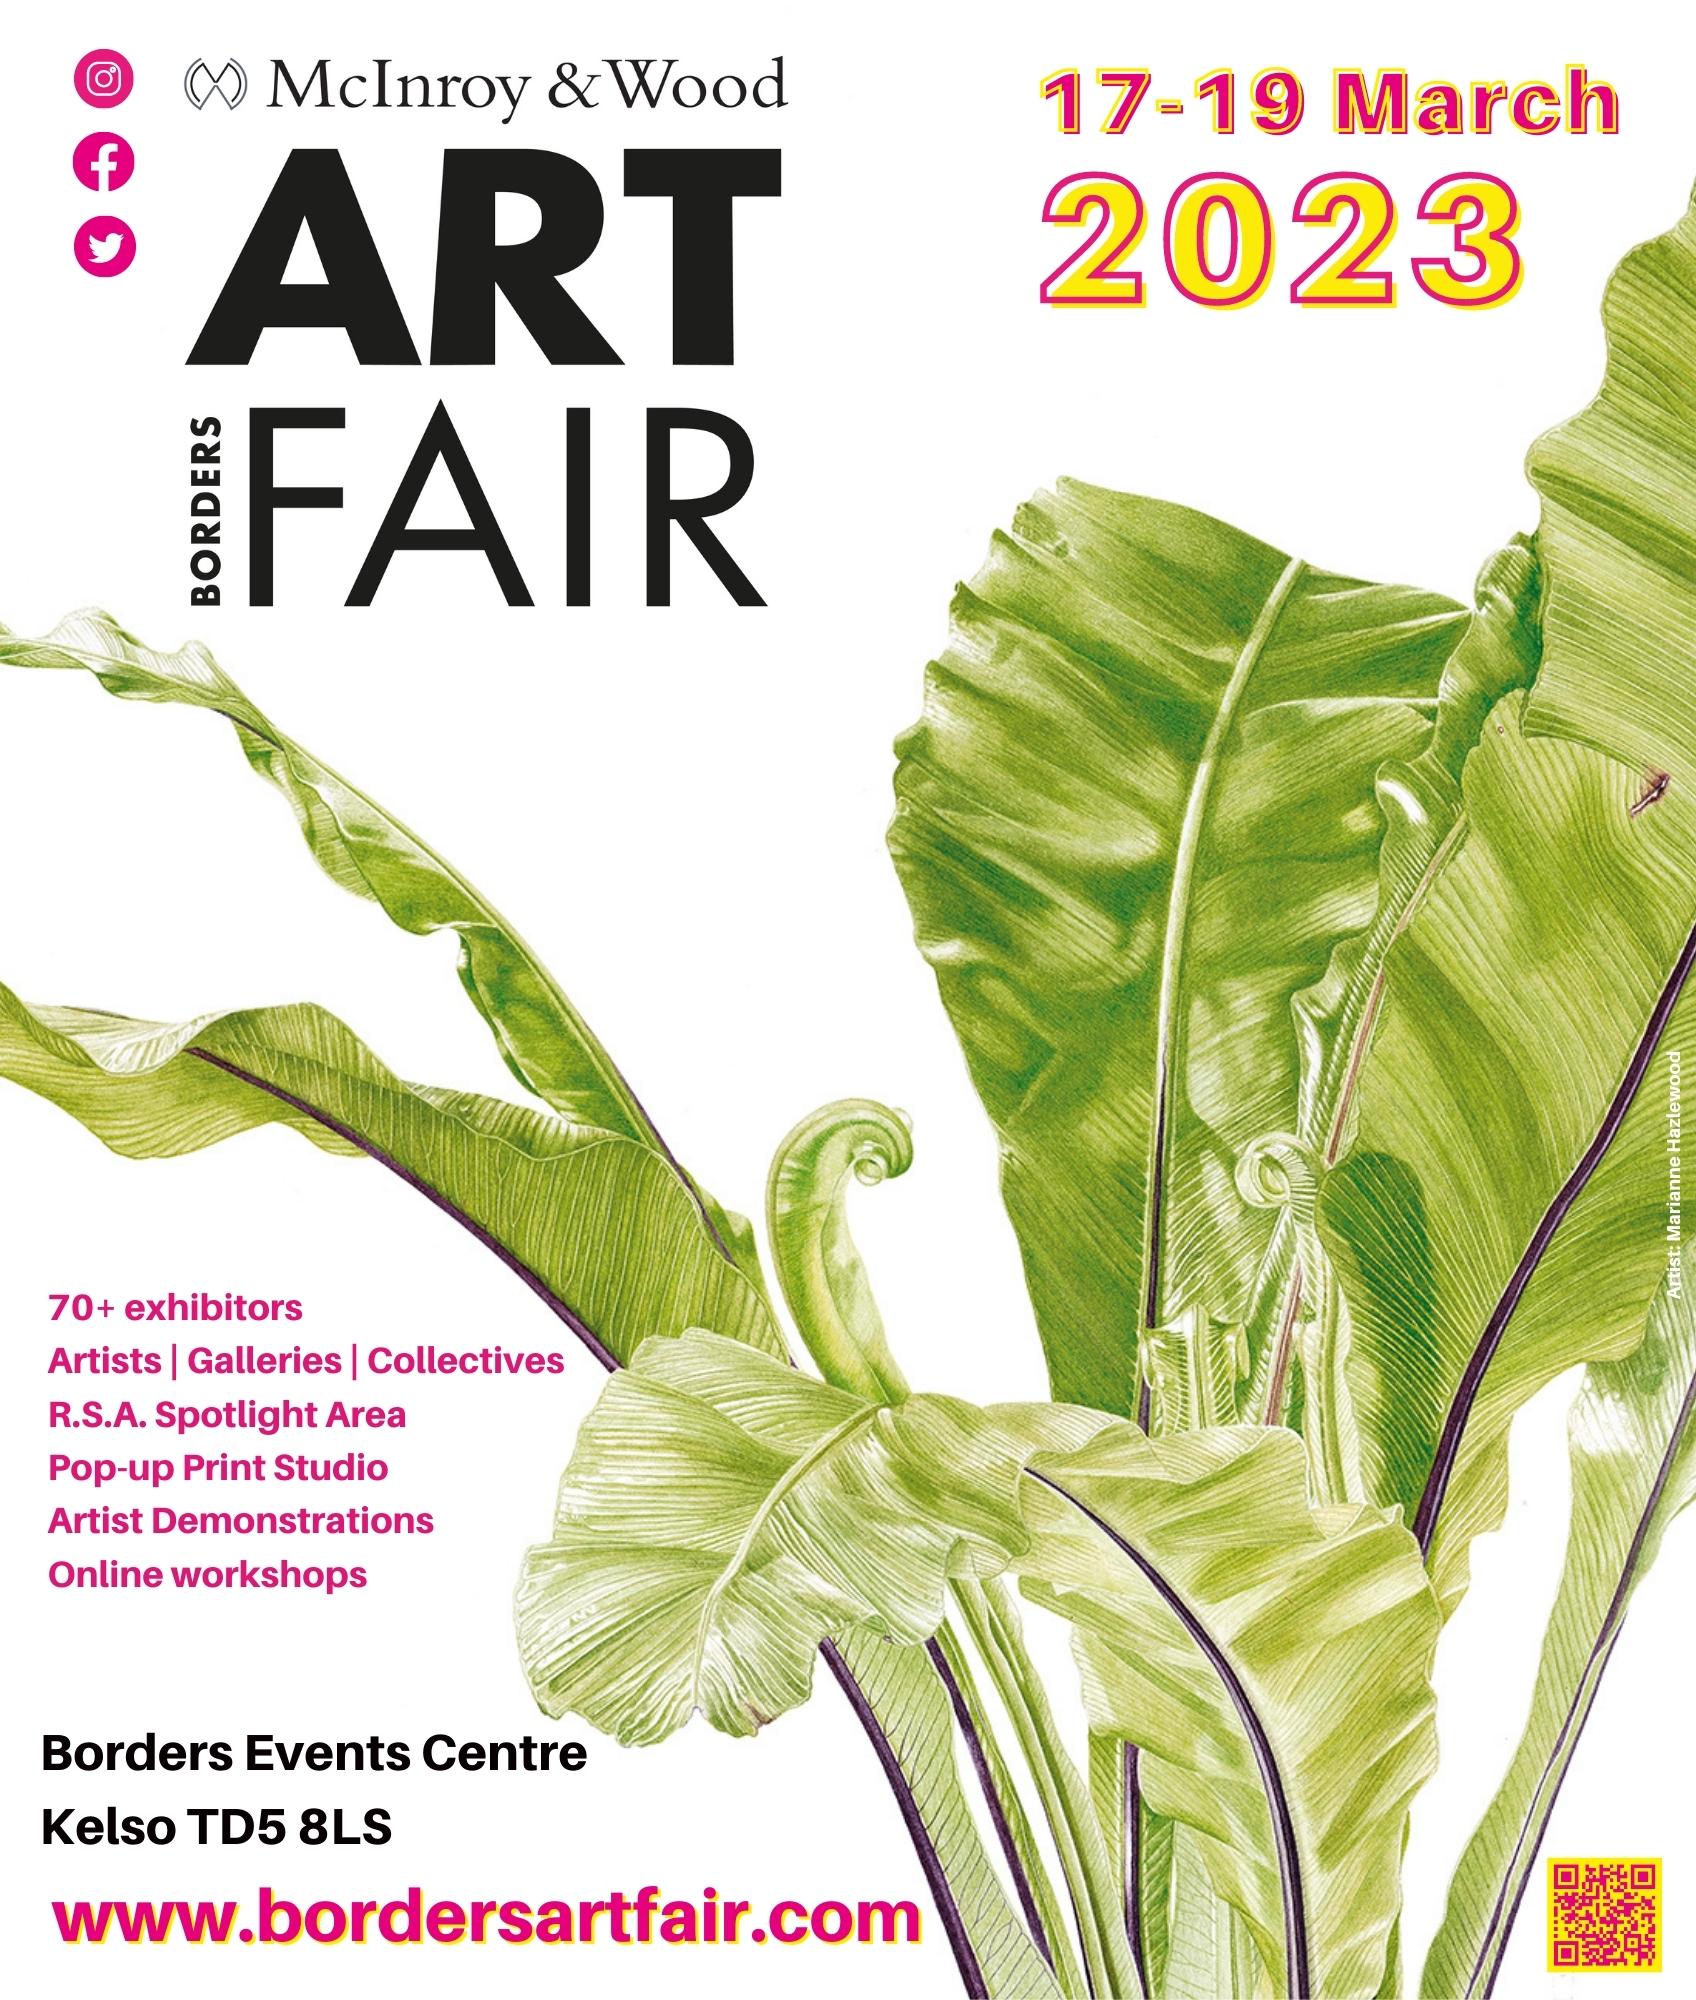 Borders Art Fair 2023 Poster - 17 - 19 March, Borders Events, Center, Kelso